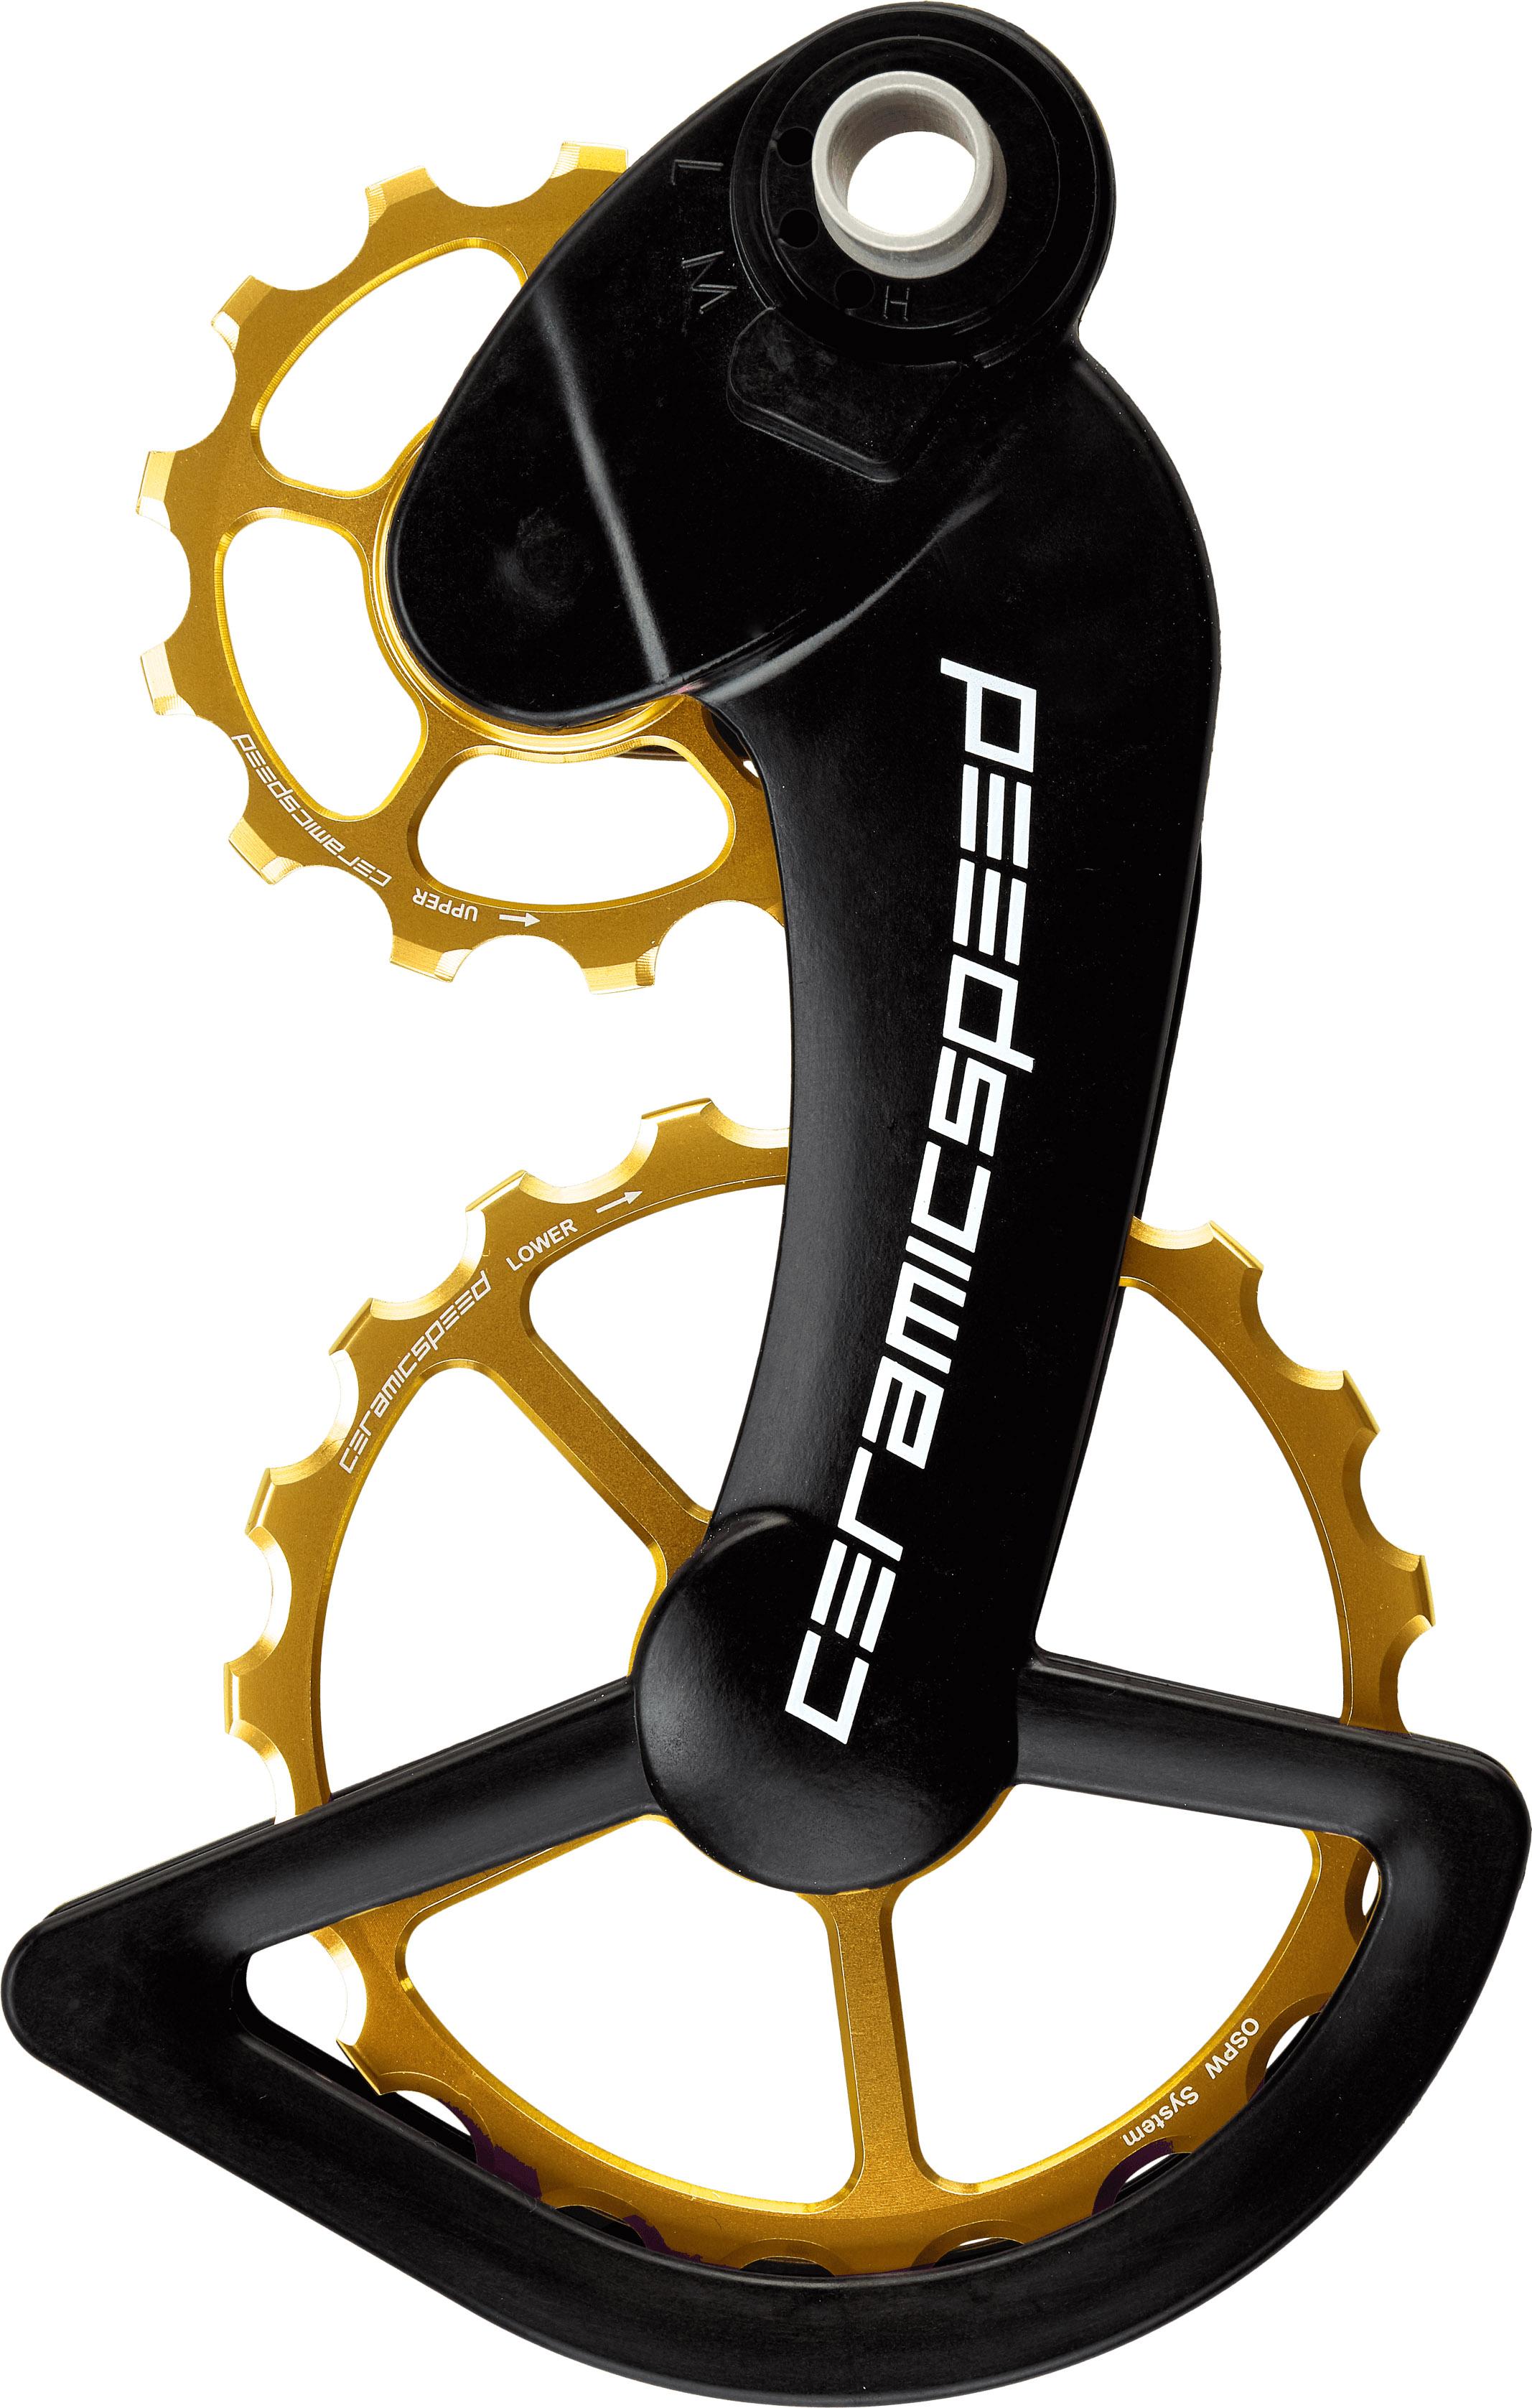 Ceramicspeed Ospw Campagnolo Coated - Gold